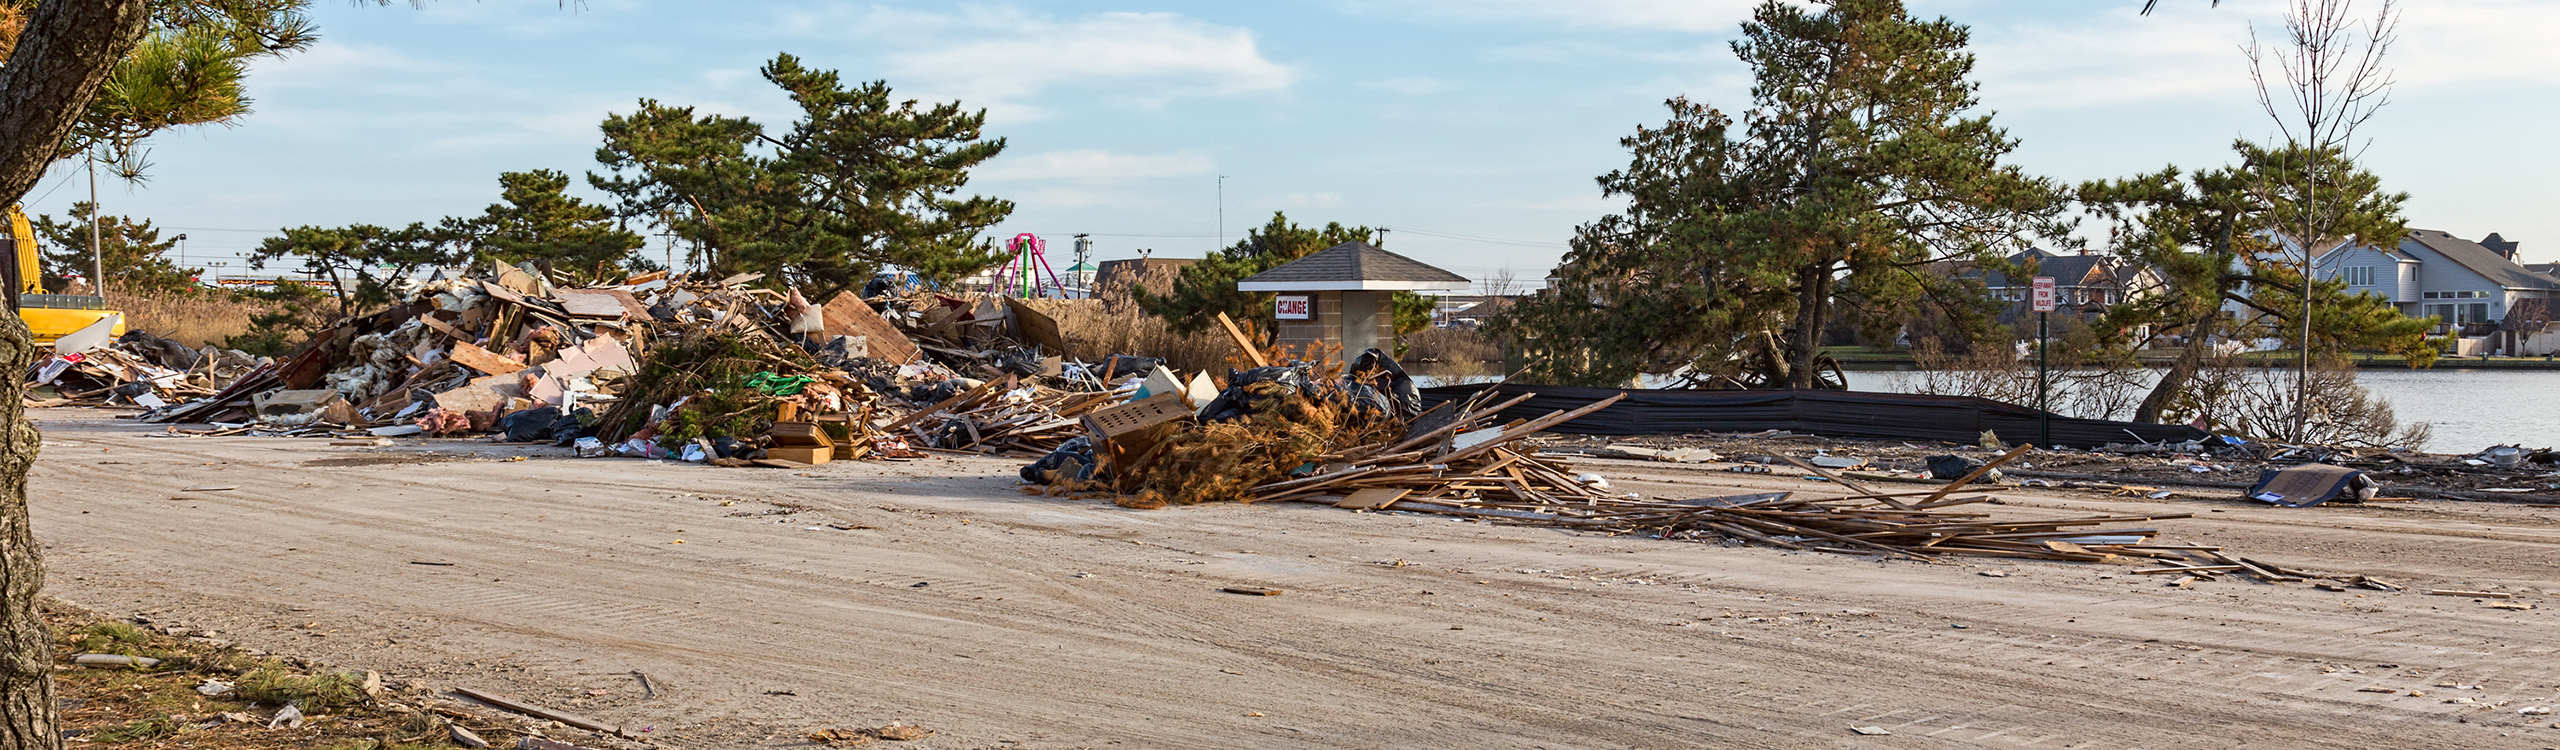 Hurrican Sandy aftermath in Point Pleasant, New Jersey